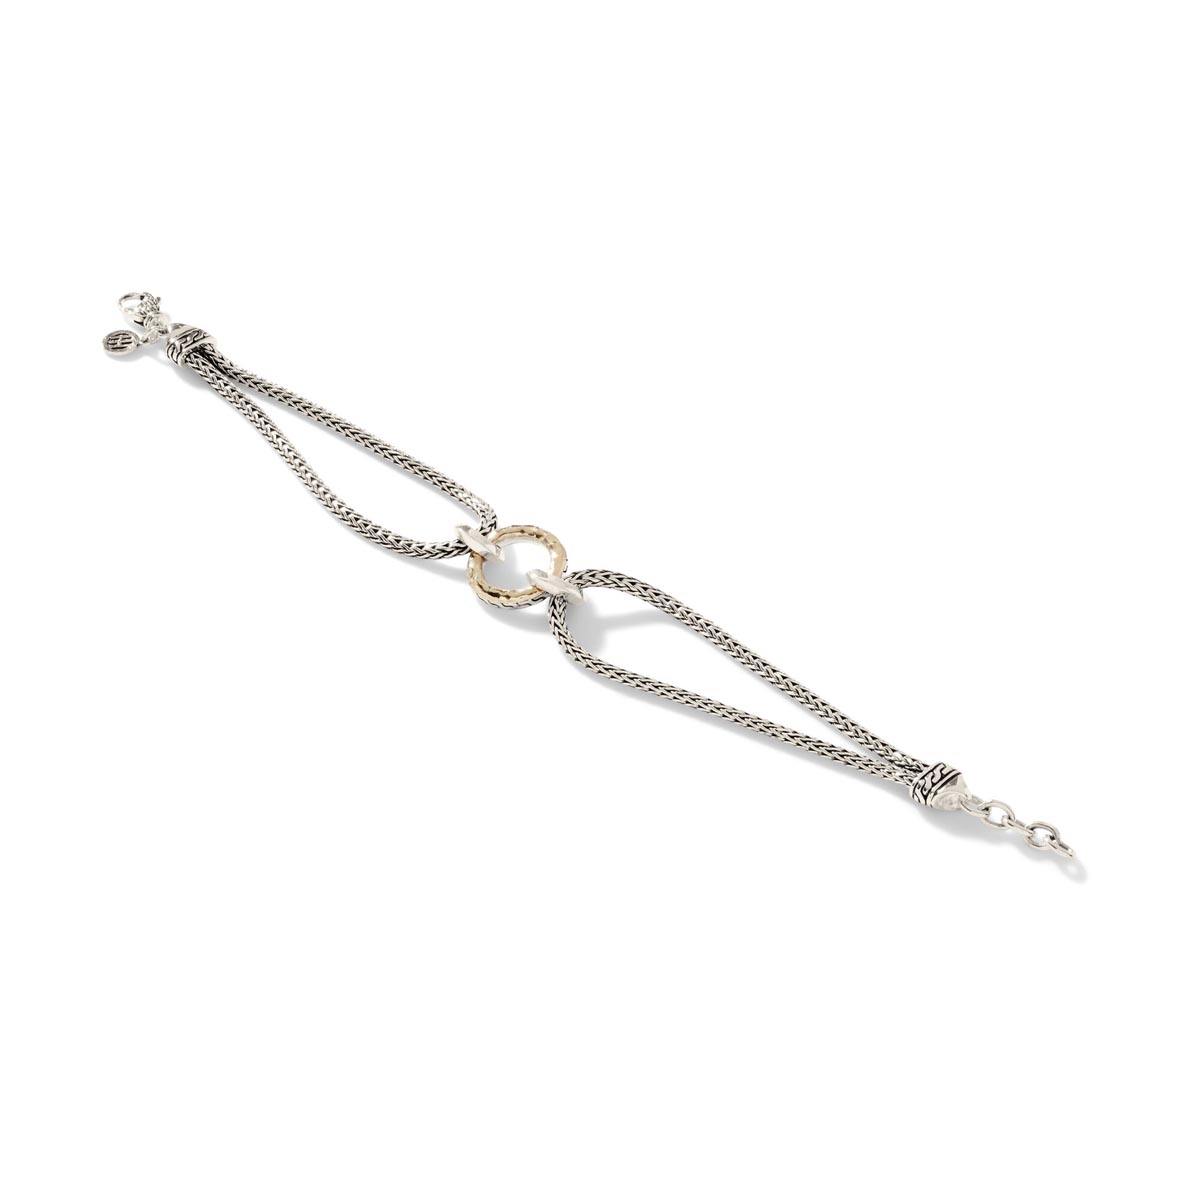 John Hardy Classic Chain Collection Palu Station Bracelet in Sterling Silver and 18kt Yellow Gold